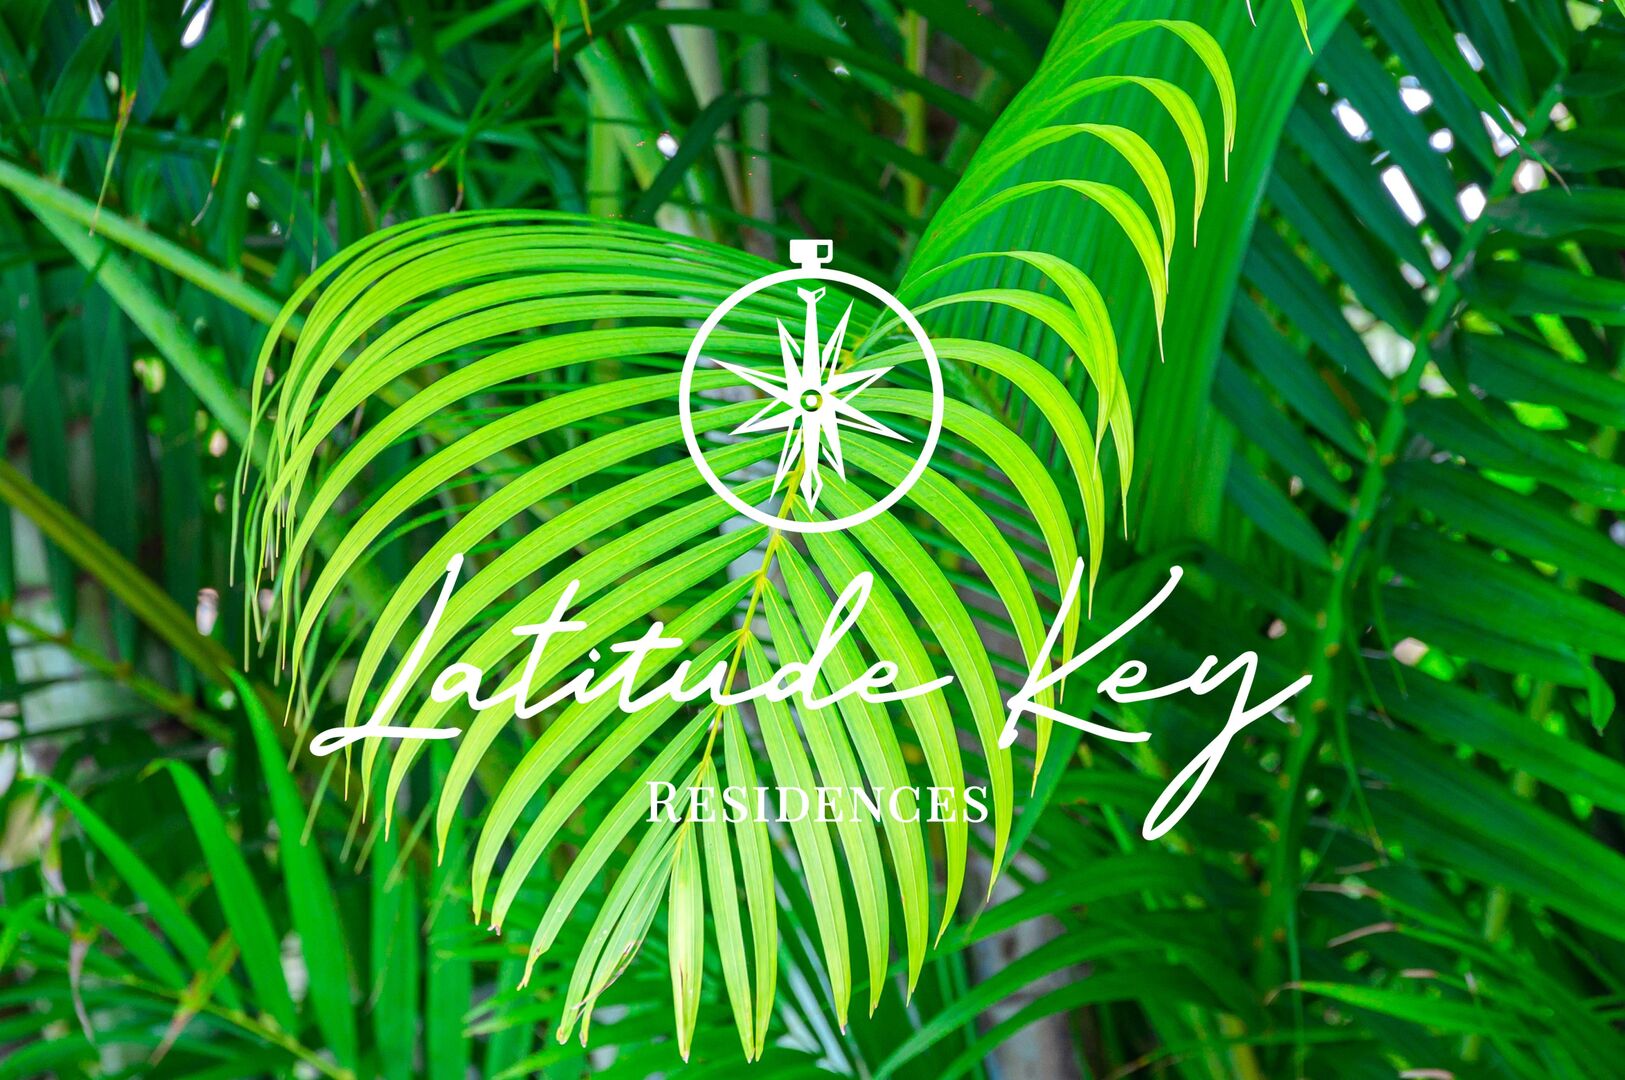 Seaside Key is part of the Residences Collection. Enjoy a stress free vacation with Latitude Key - Curated Vacation Properties